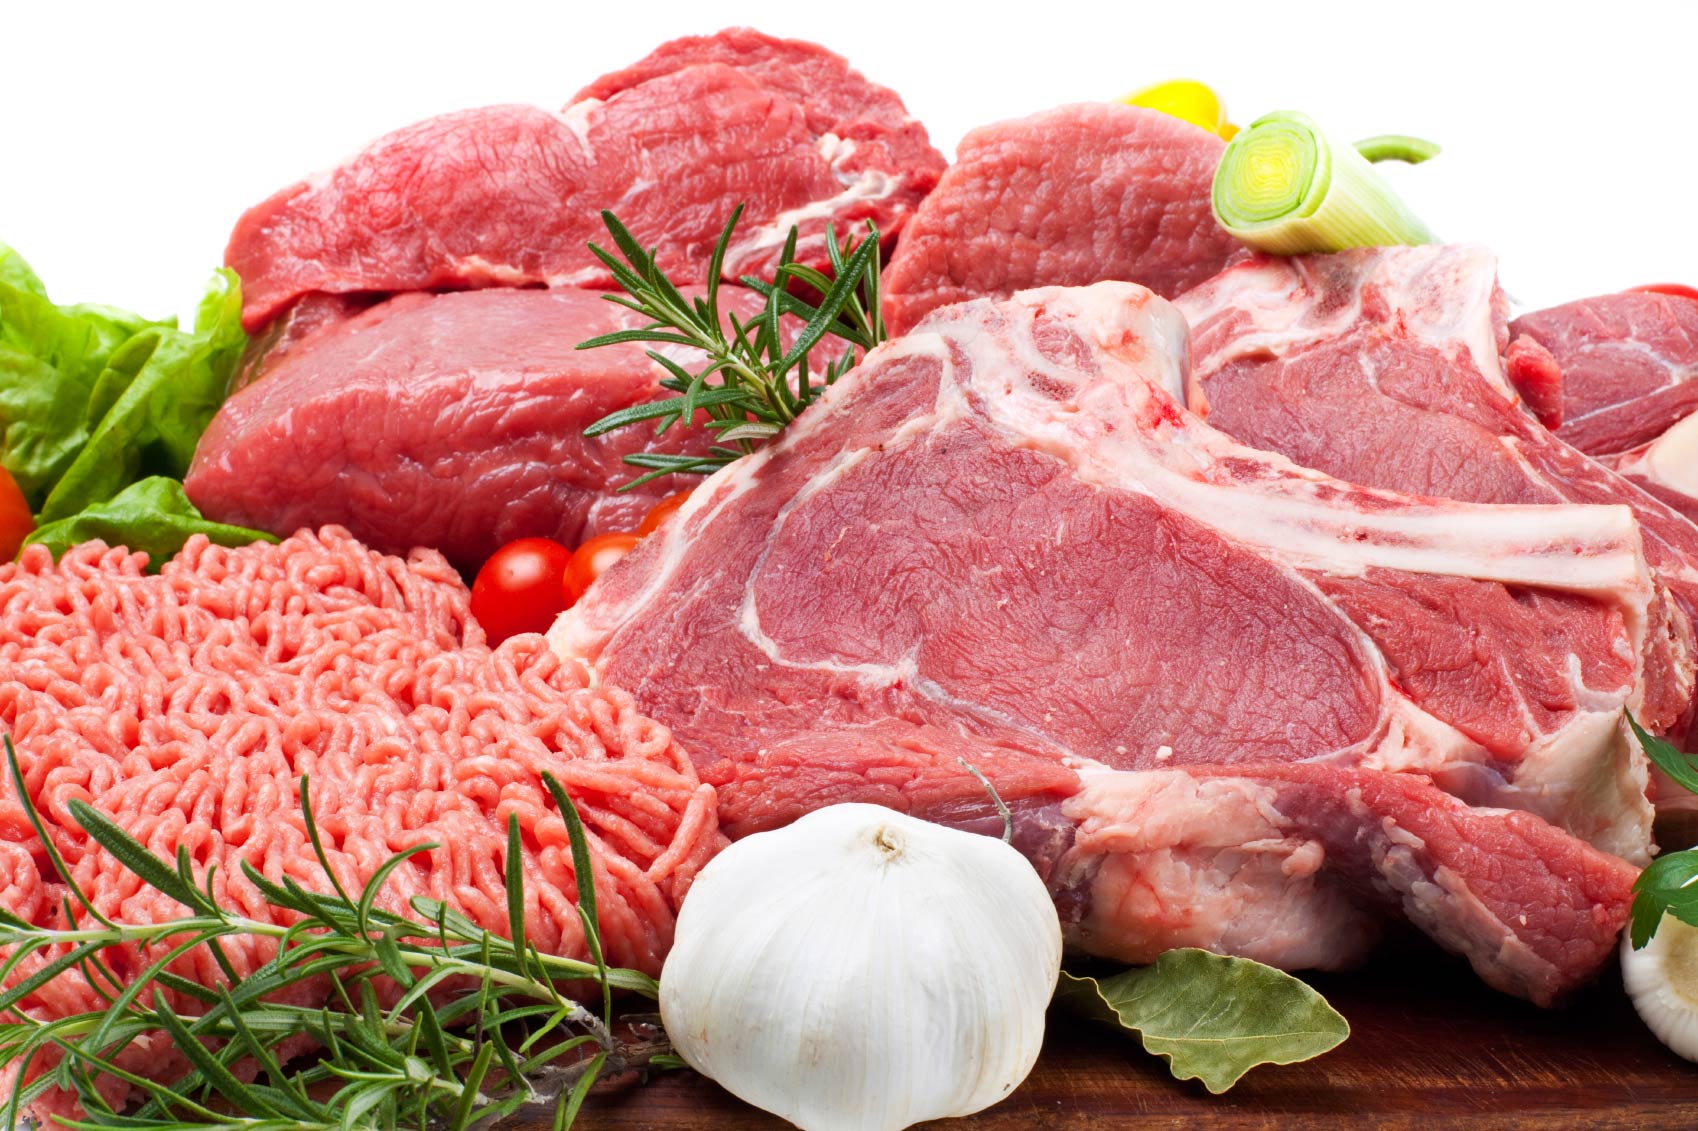 Canyon Wholesale Provisions - your best choice for all types of meat